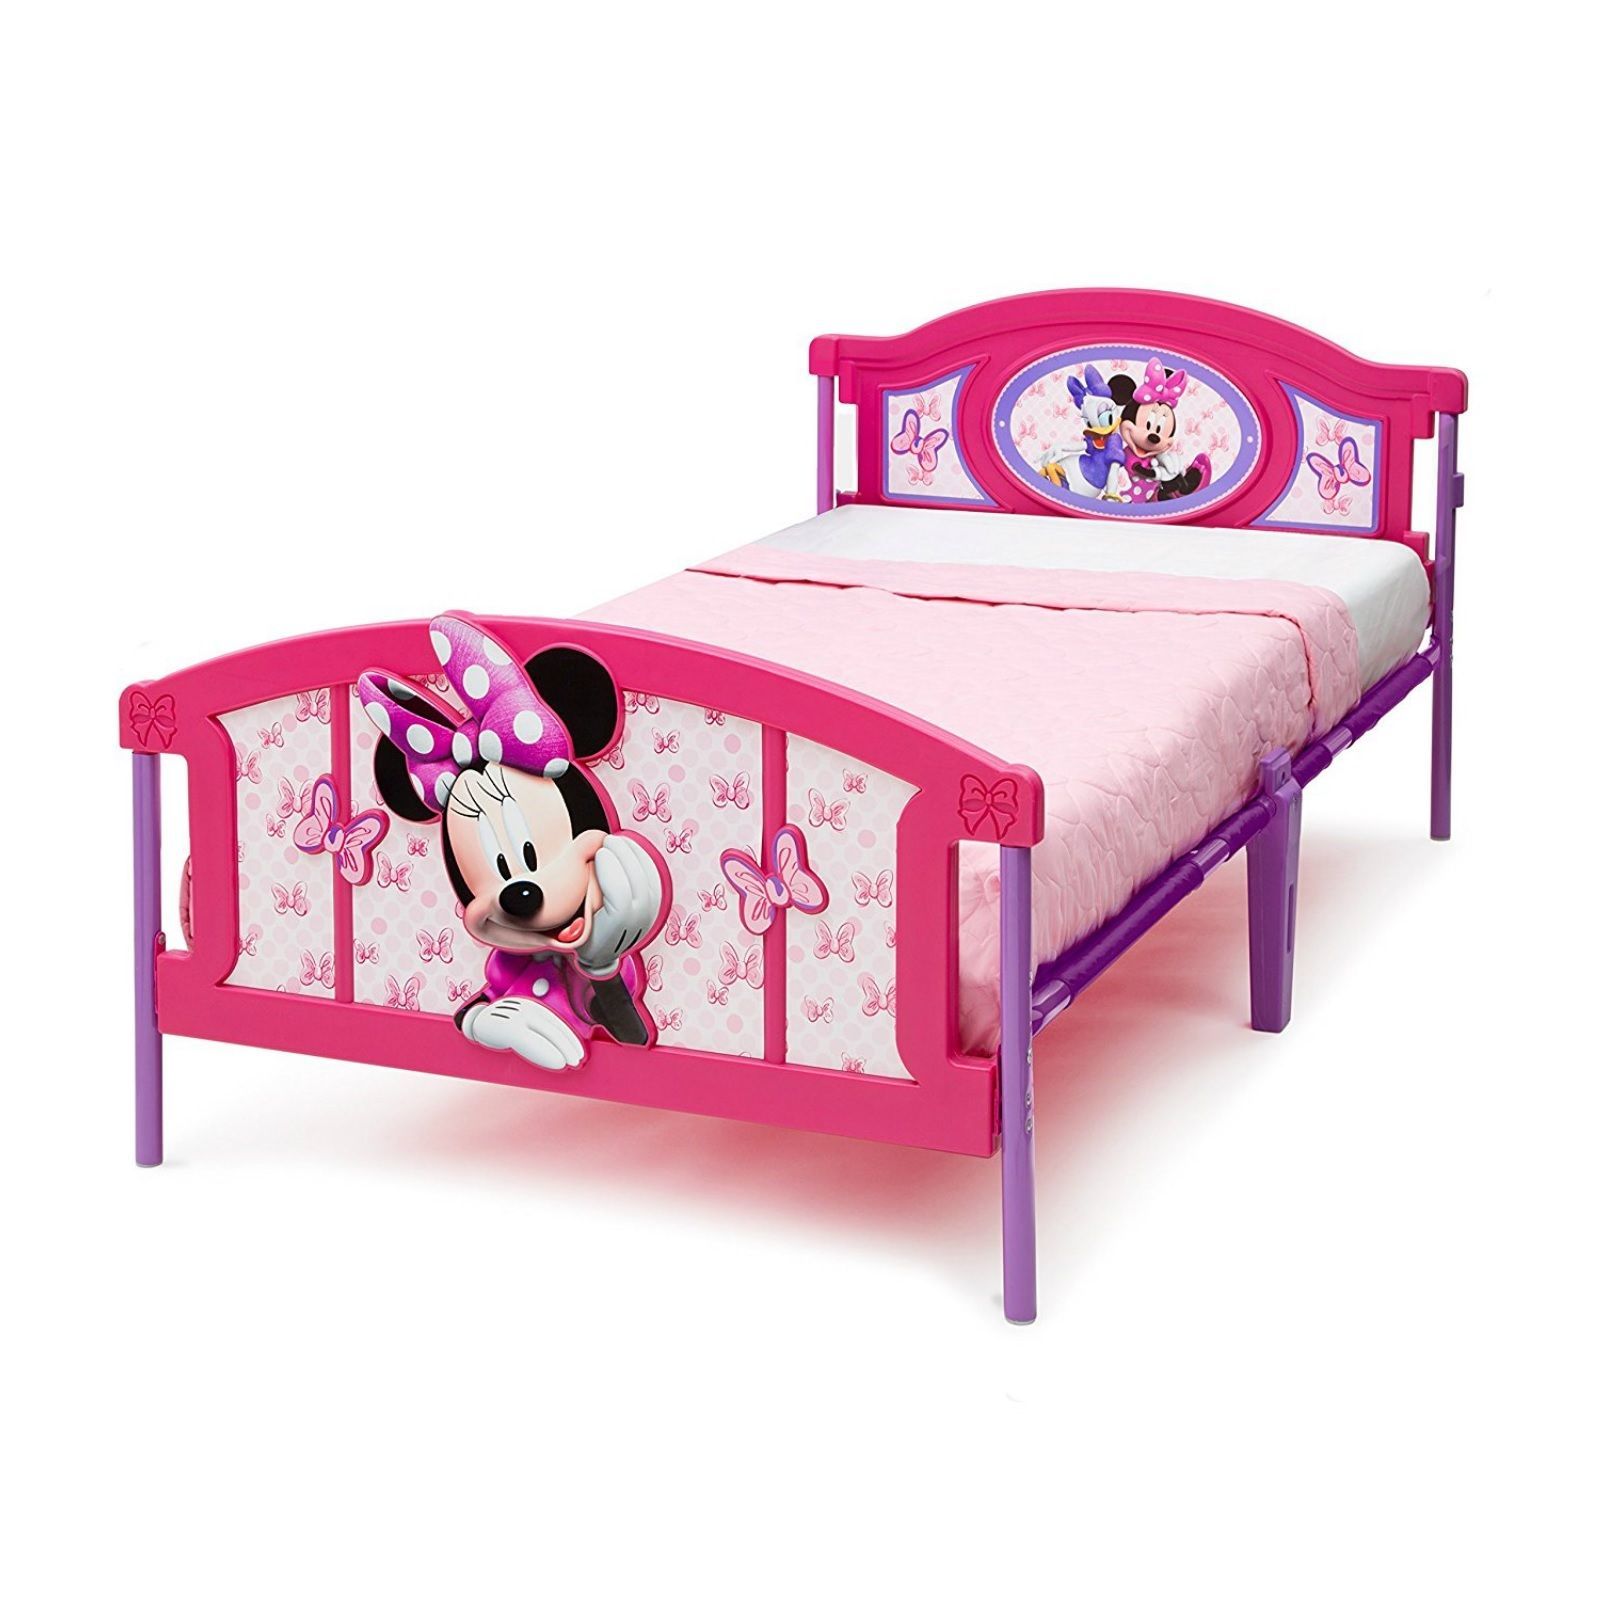 Twin Bed Frame For Kids Girls Children Bedroom Furniture Minnie Mouse